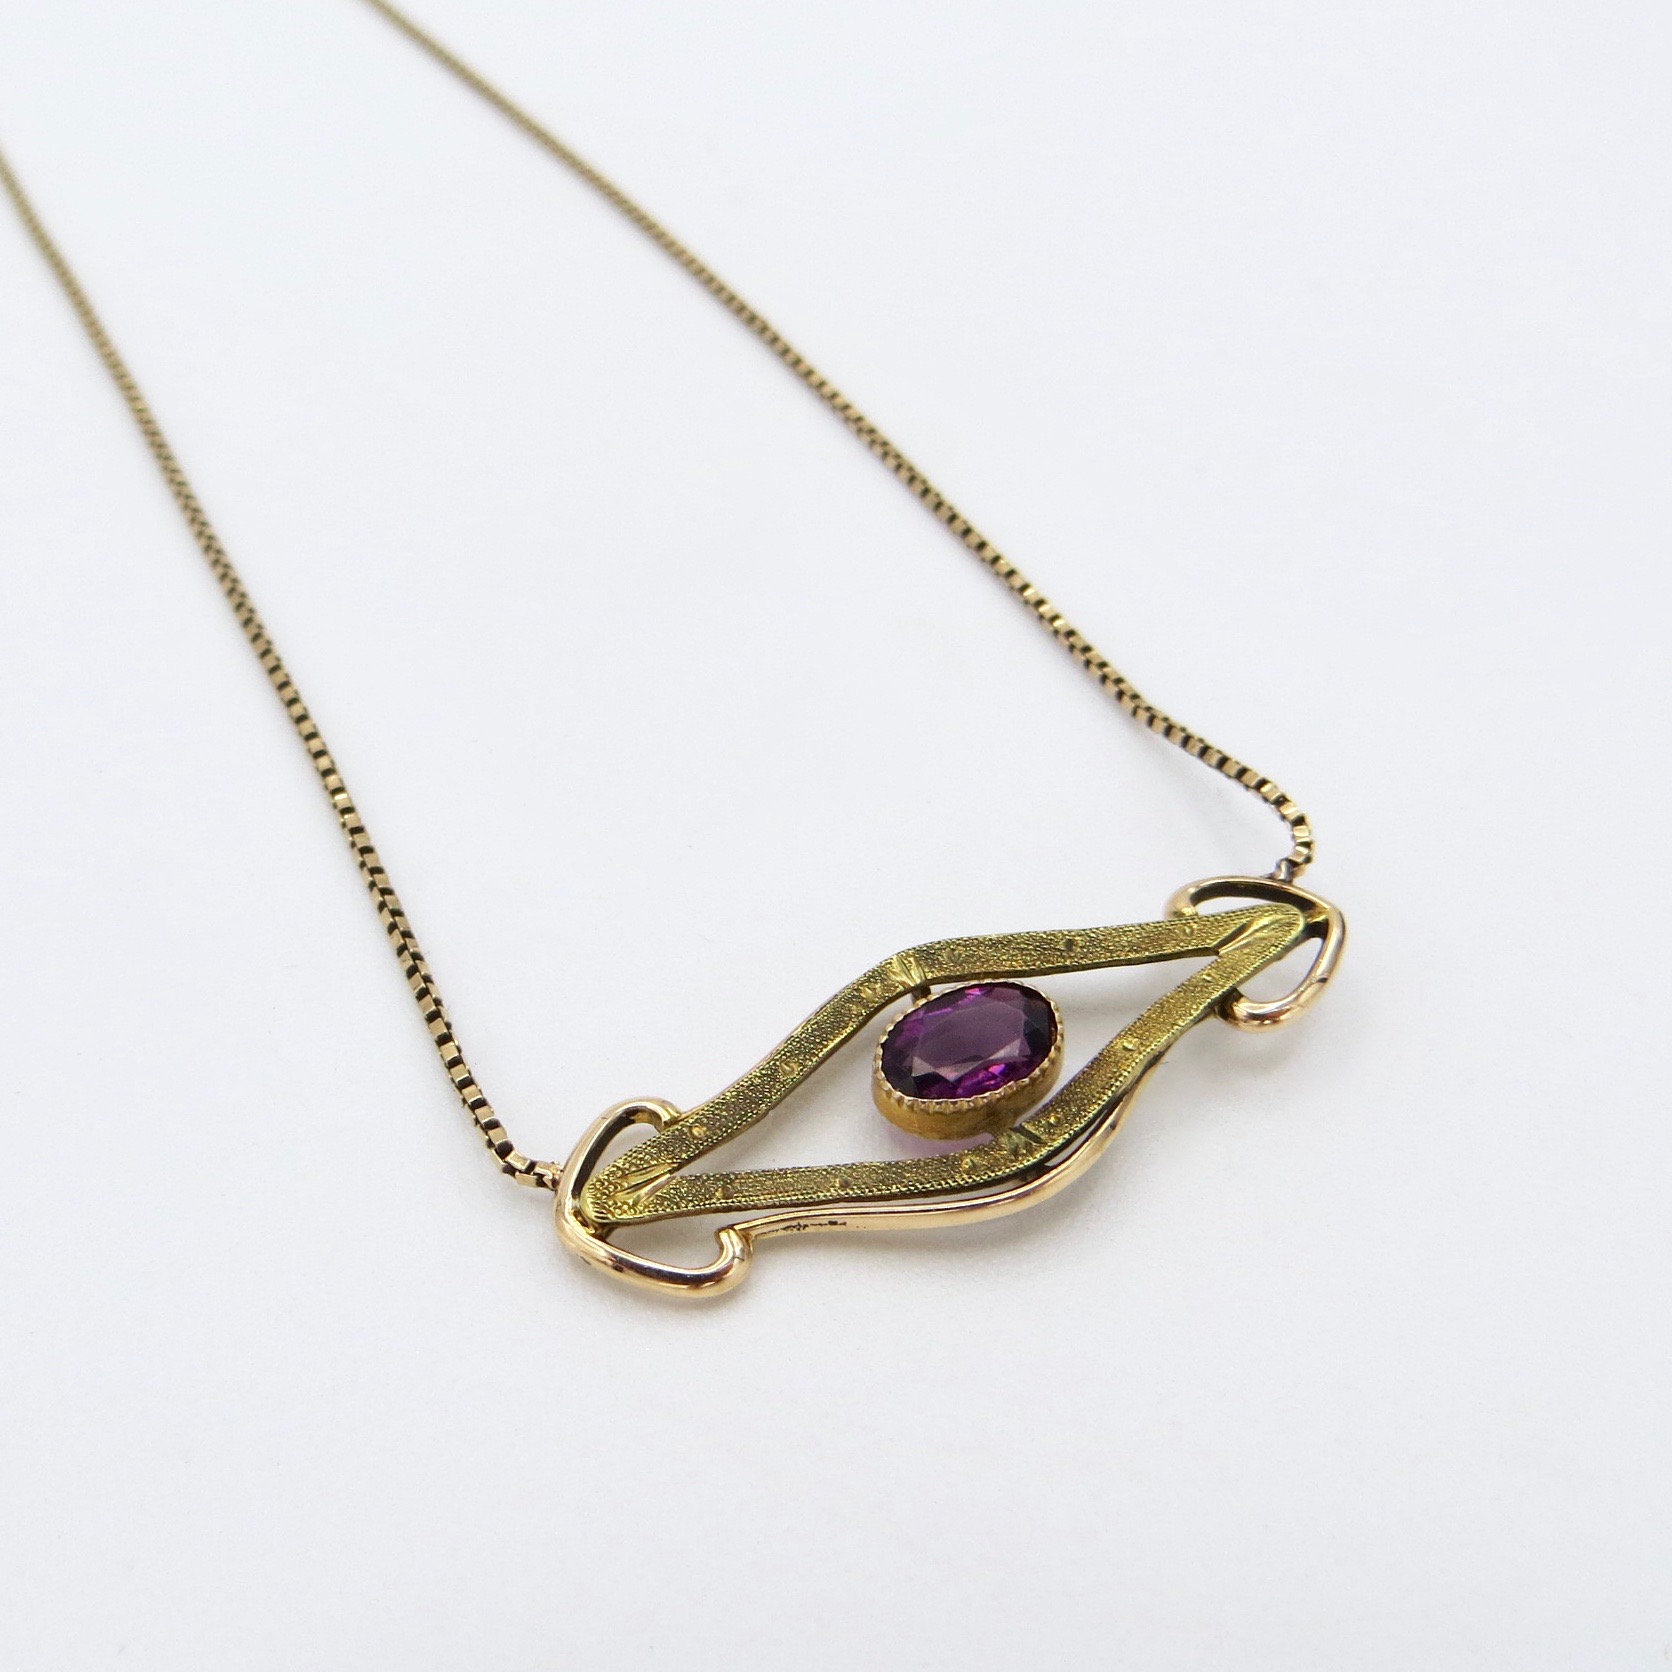 10kt Gold & Amethyst Necklace (10kt Chain)